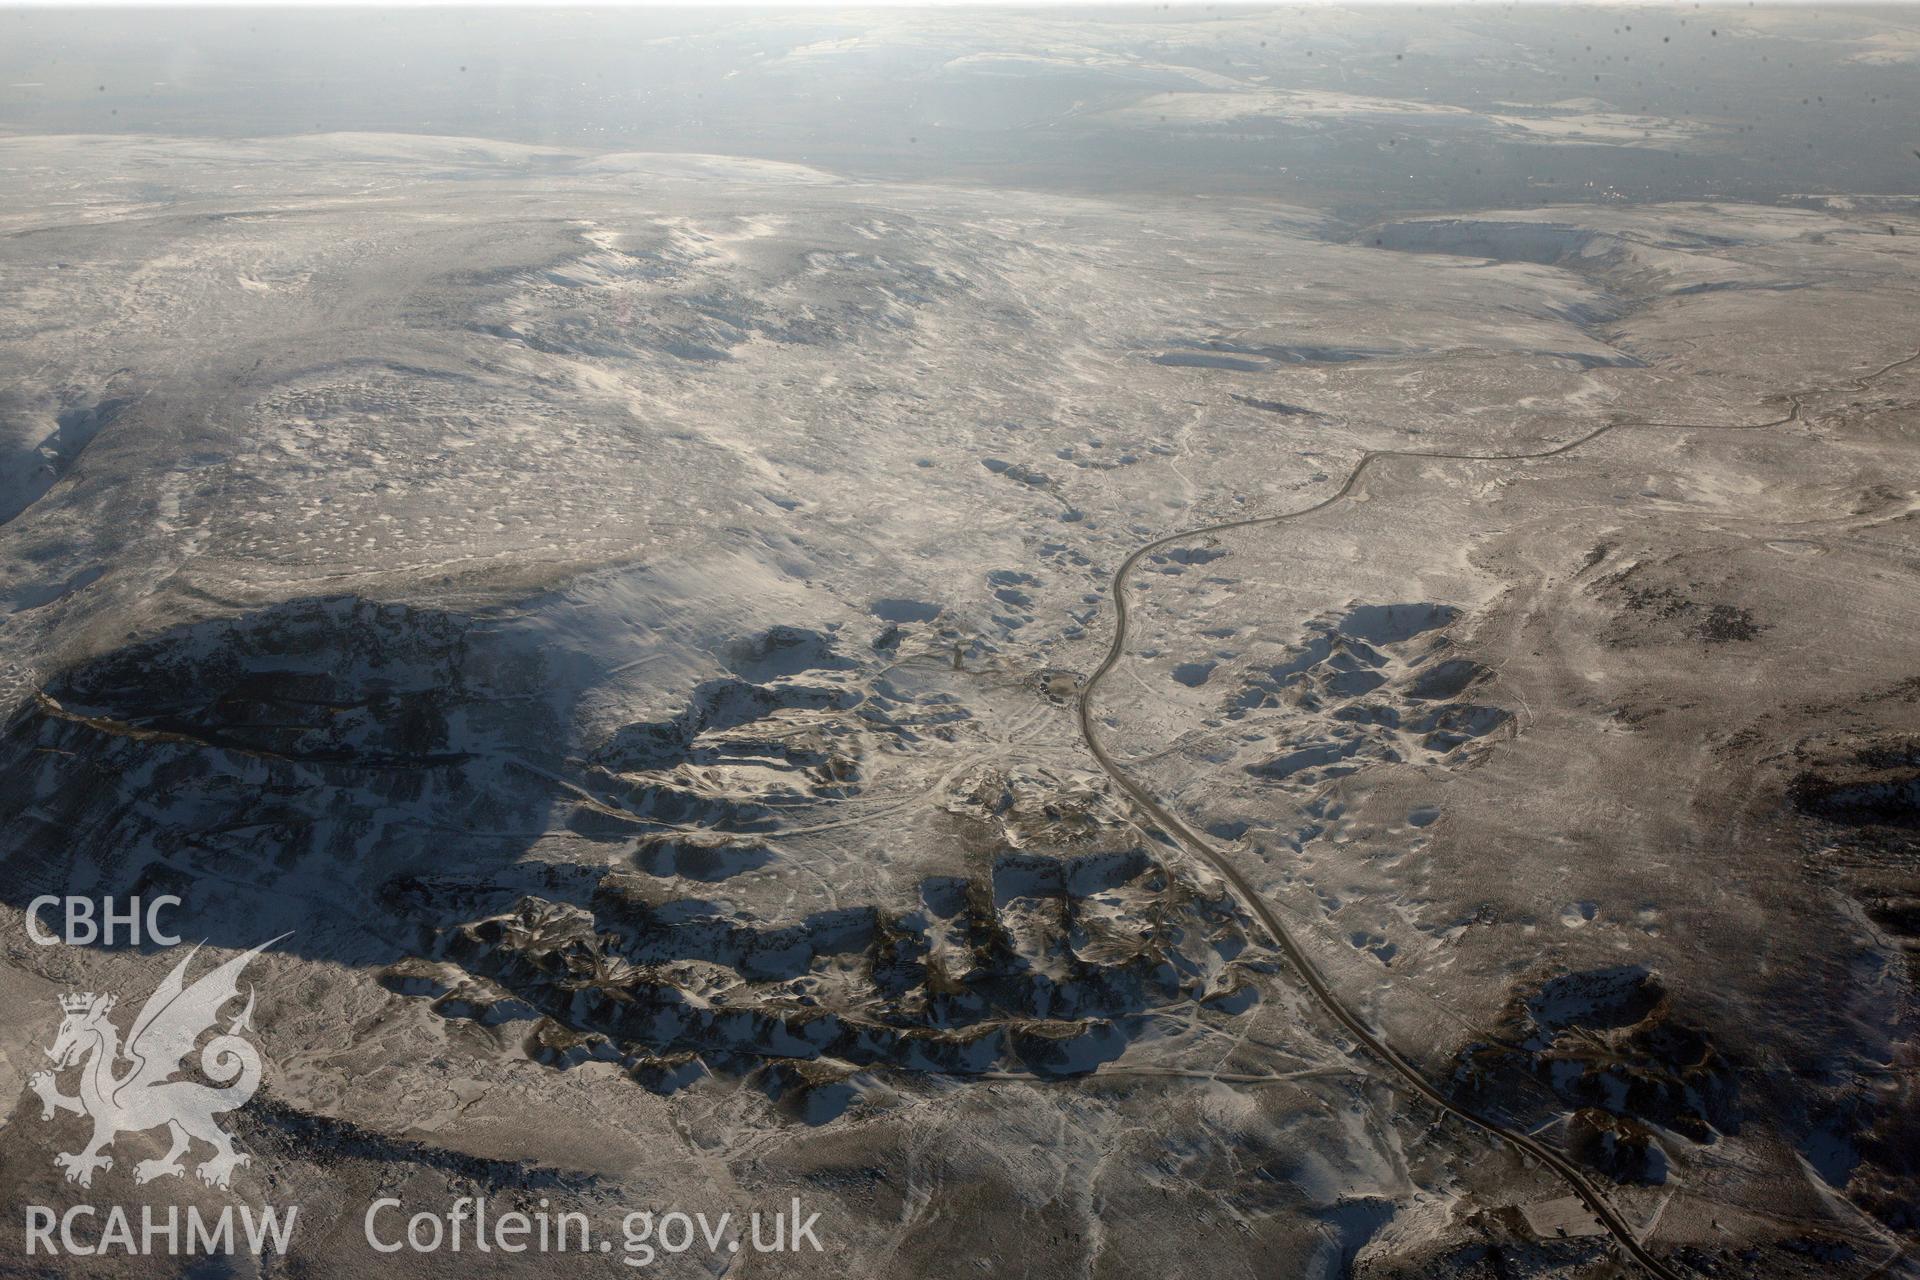 RCAHMW colour oblique photograph of Long View of Foel Fawr Quarry Complex. Taken by Toby Driver on 02/02/2012.